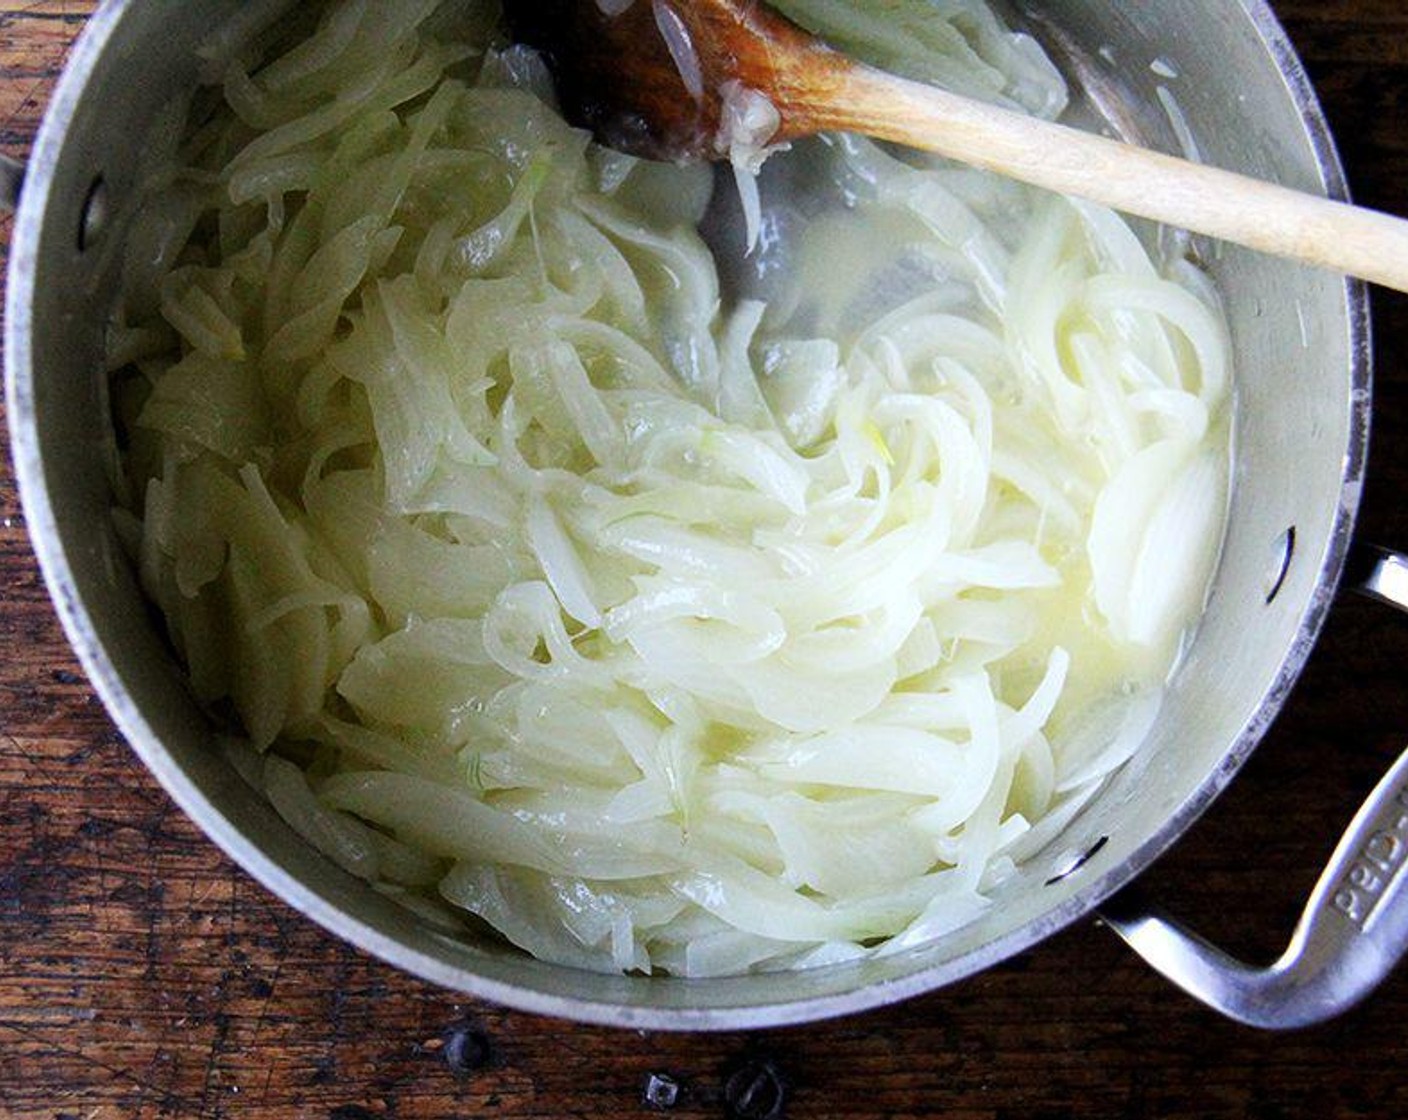 step 1 Melt the Unsalted Butter (1/2 cup) over medium heat in a large pot. Add the Onions (2) and cook gently, lowering the heat if necessary, until the onions are soft, about 15 minutes.